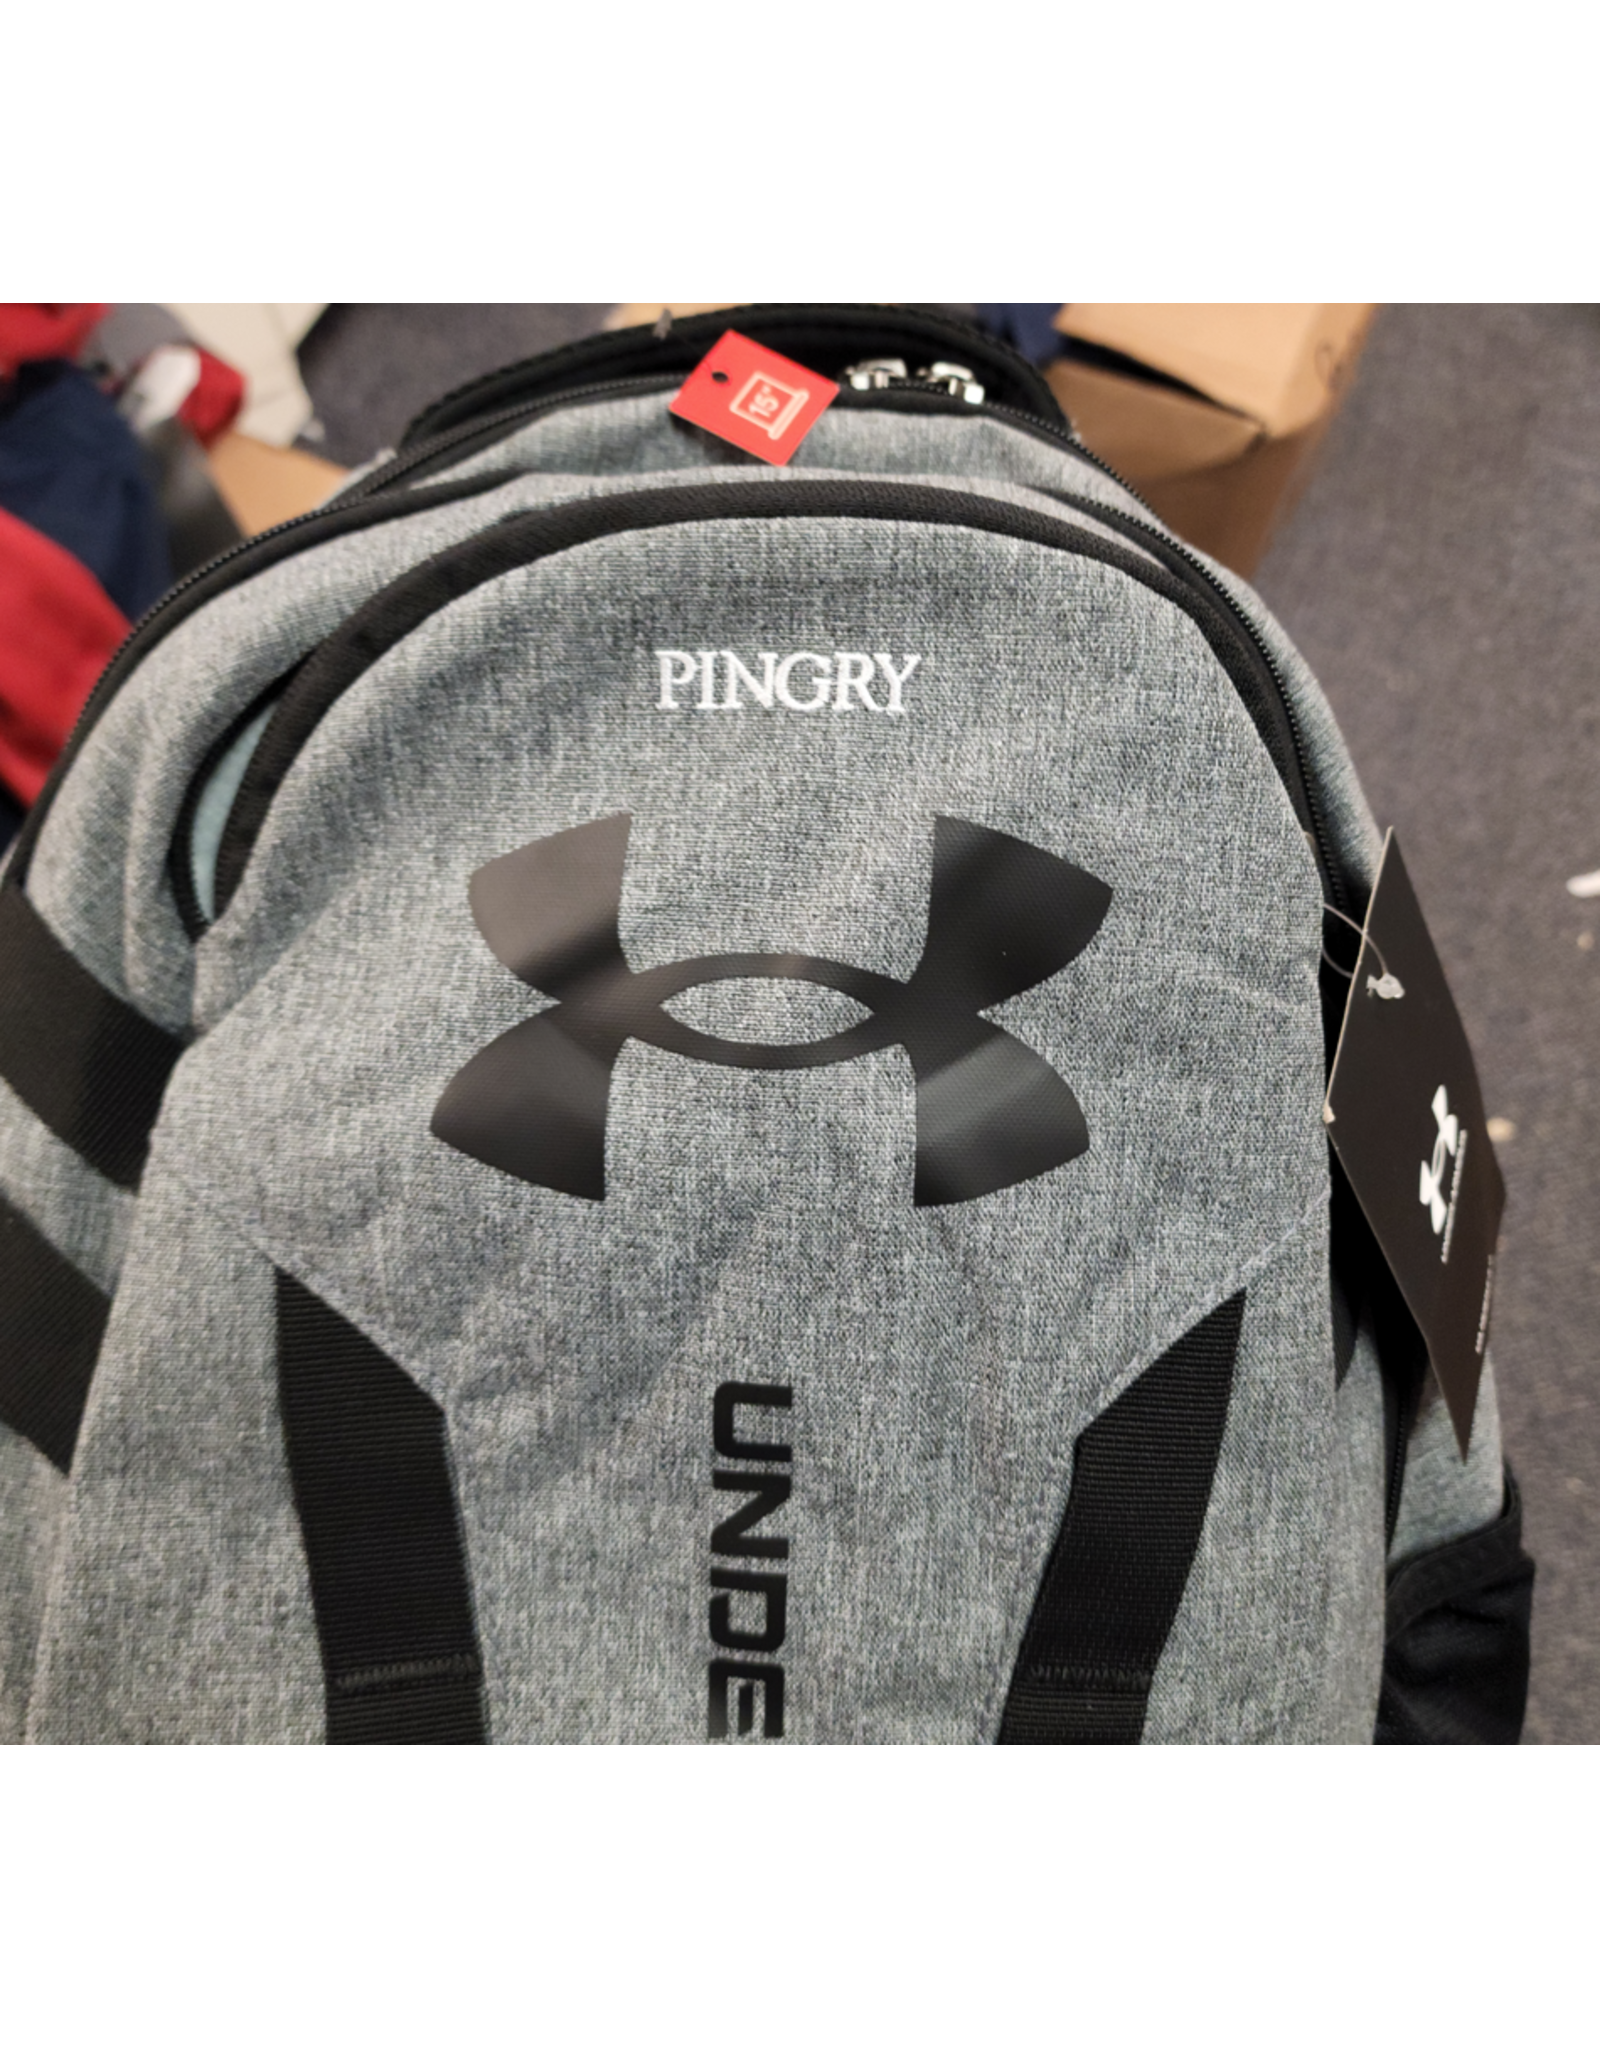 Under Armour Pingry Under Armour 5.0 Backpack